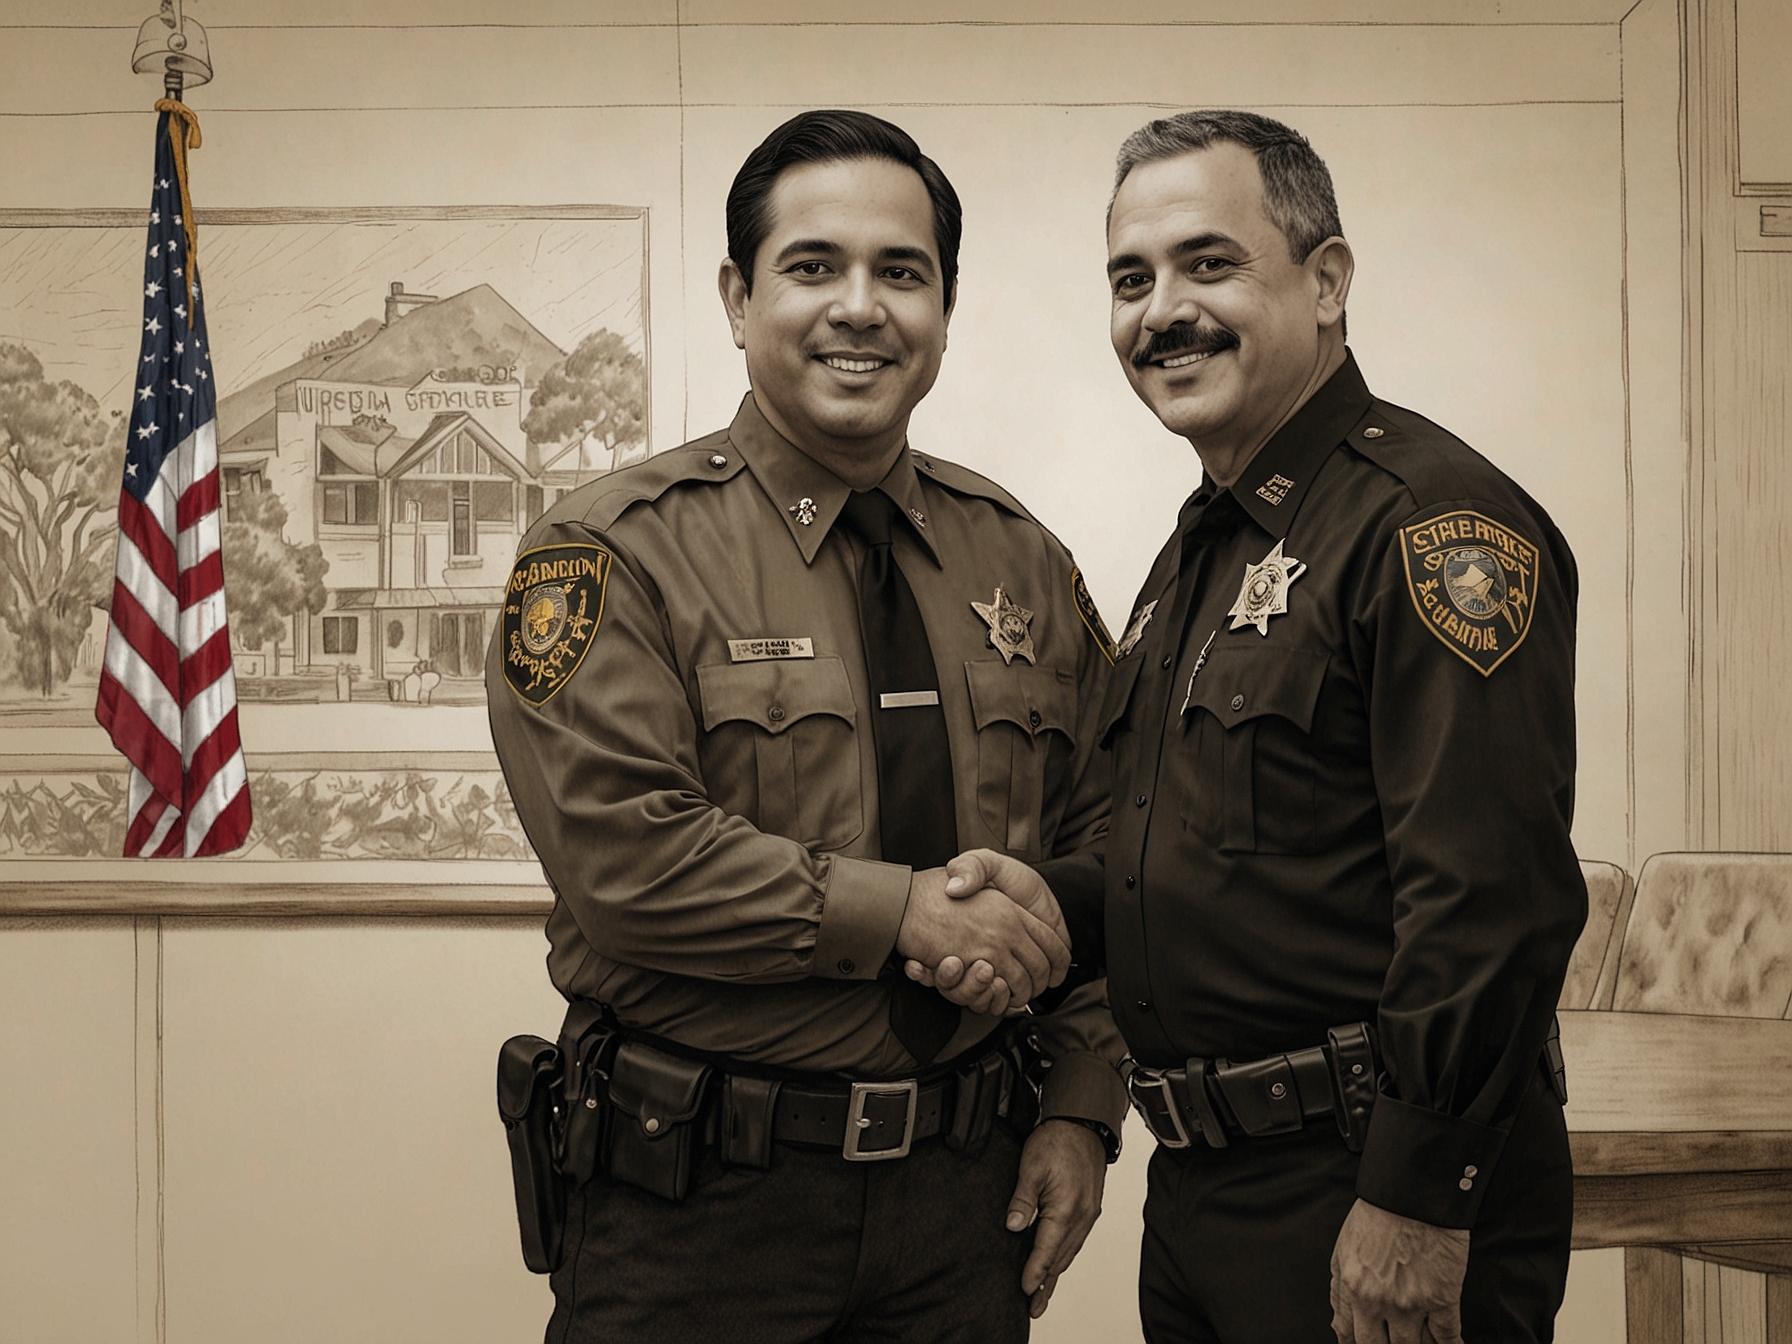 Dan Perea stands formally dressed in uniform, shaking hands with Sheriff Carlos Bolanos, symbolizing the leadership transition within the San Mateo County Sheriff’s Office.